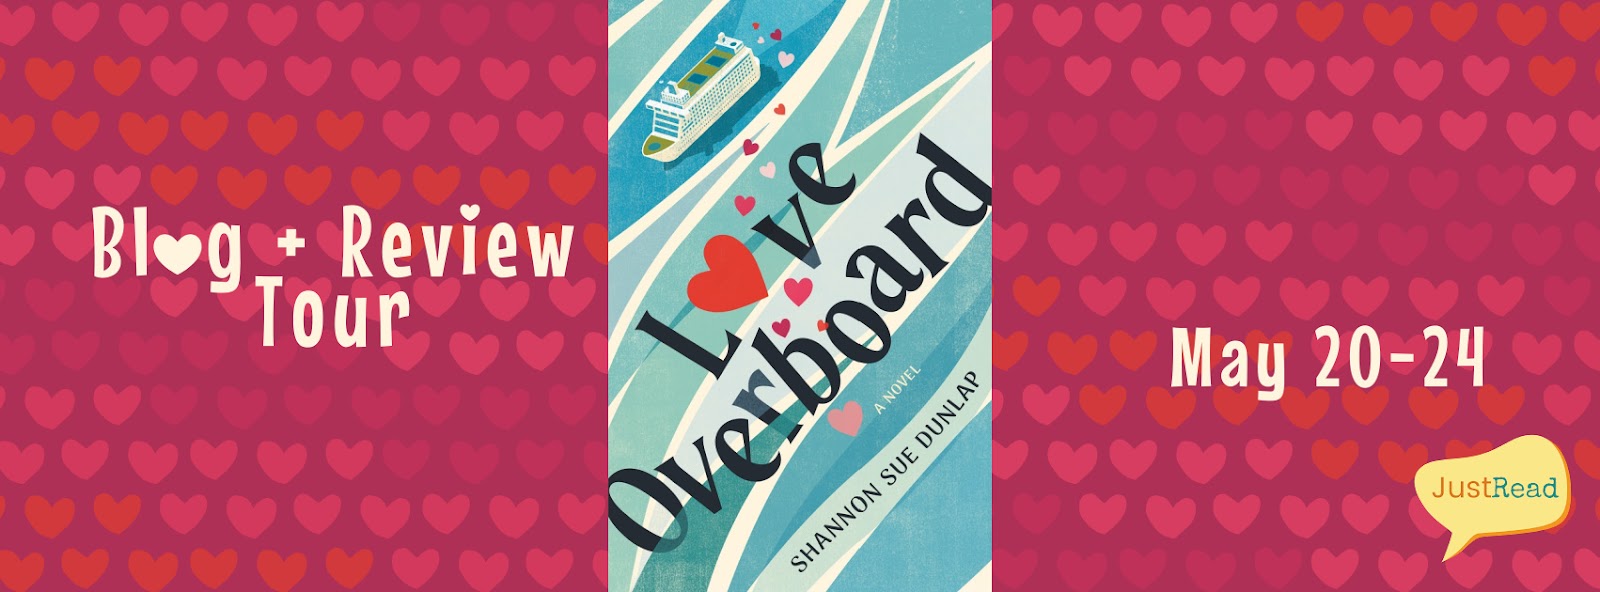 Love Overboard JustRead Blog + Review Tour